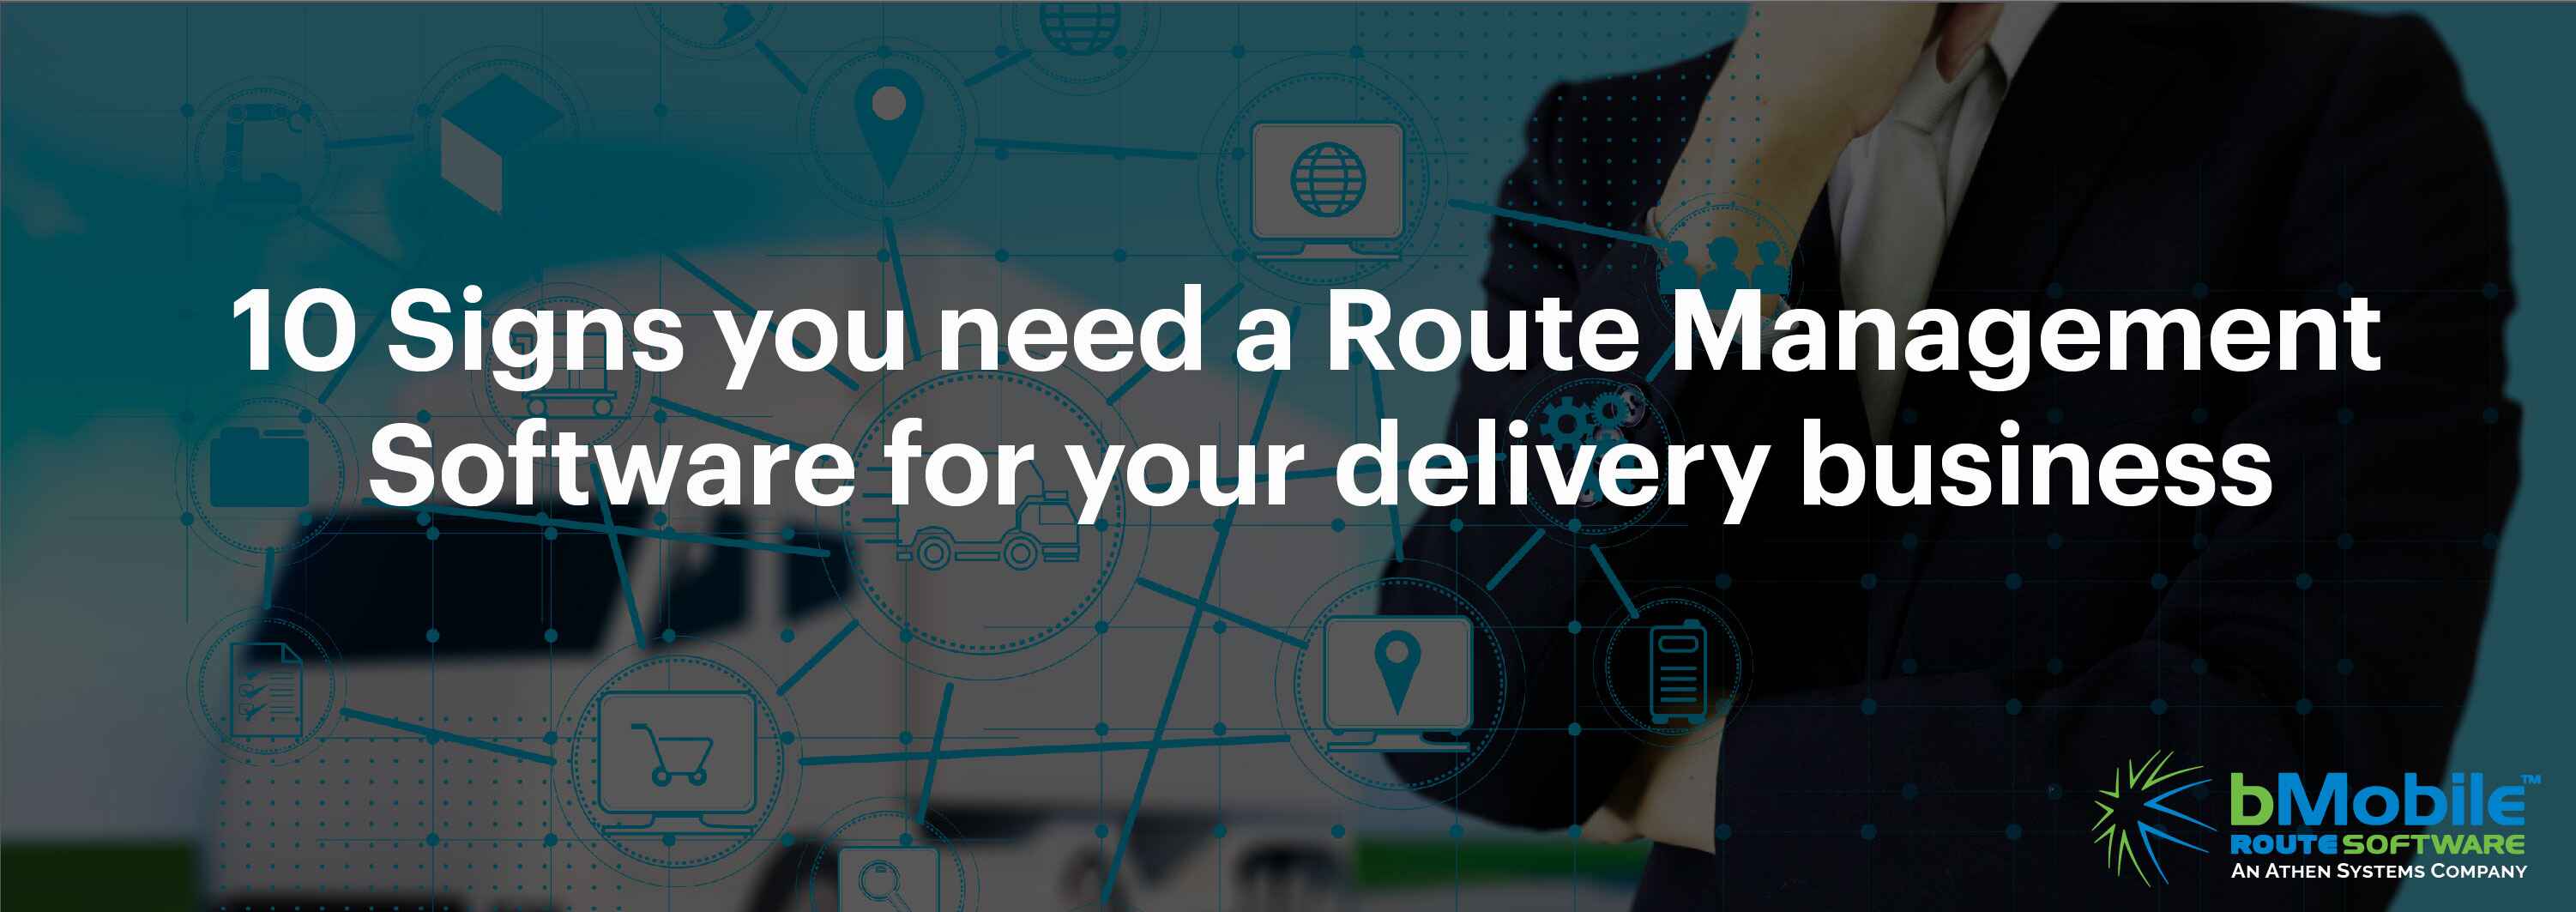 10 signs you need a route management software for your delivery business